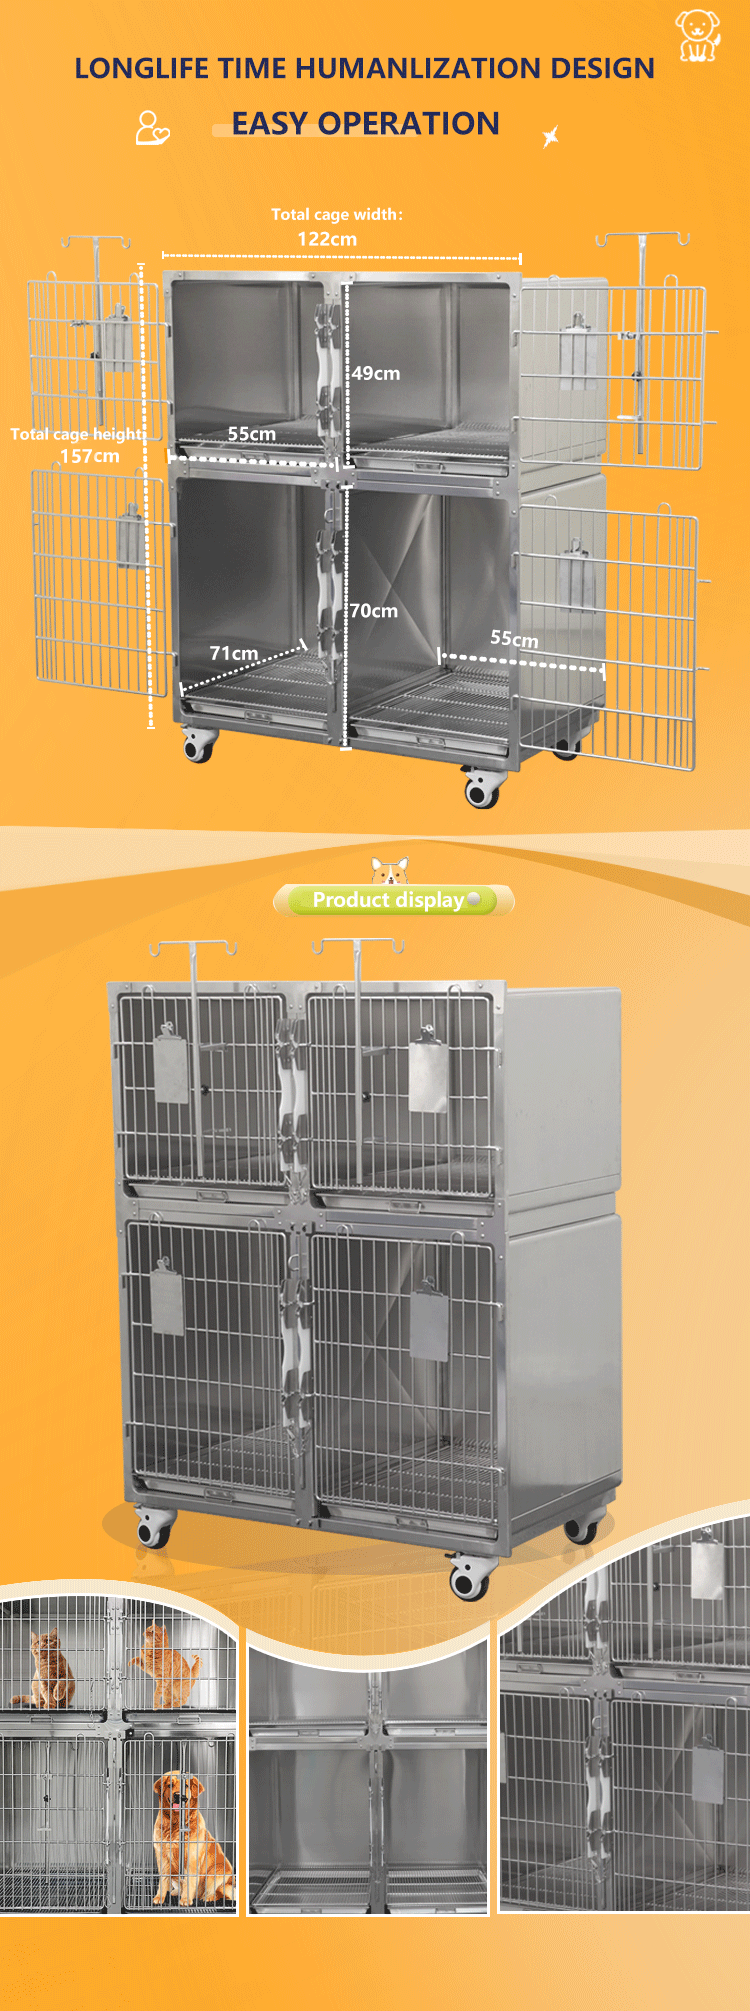 Stainless steel pet cages